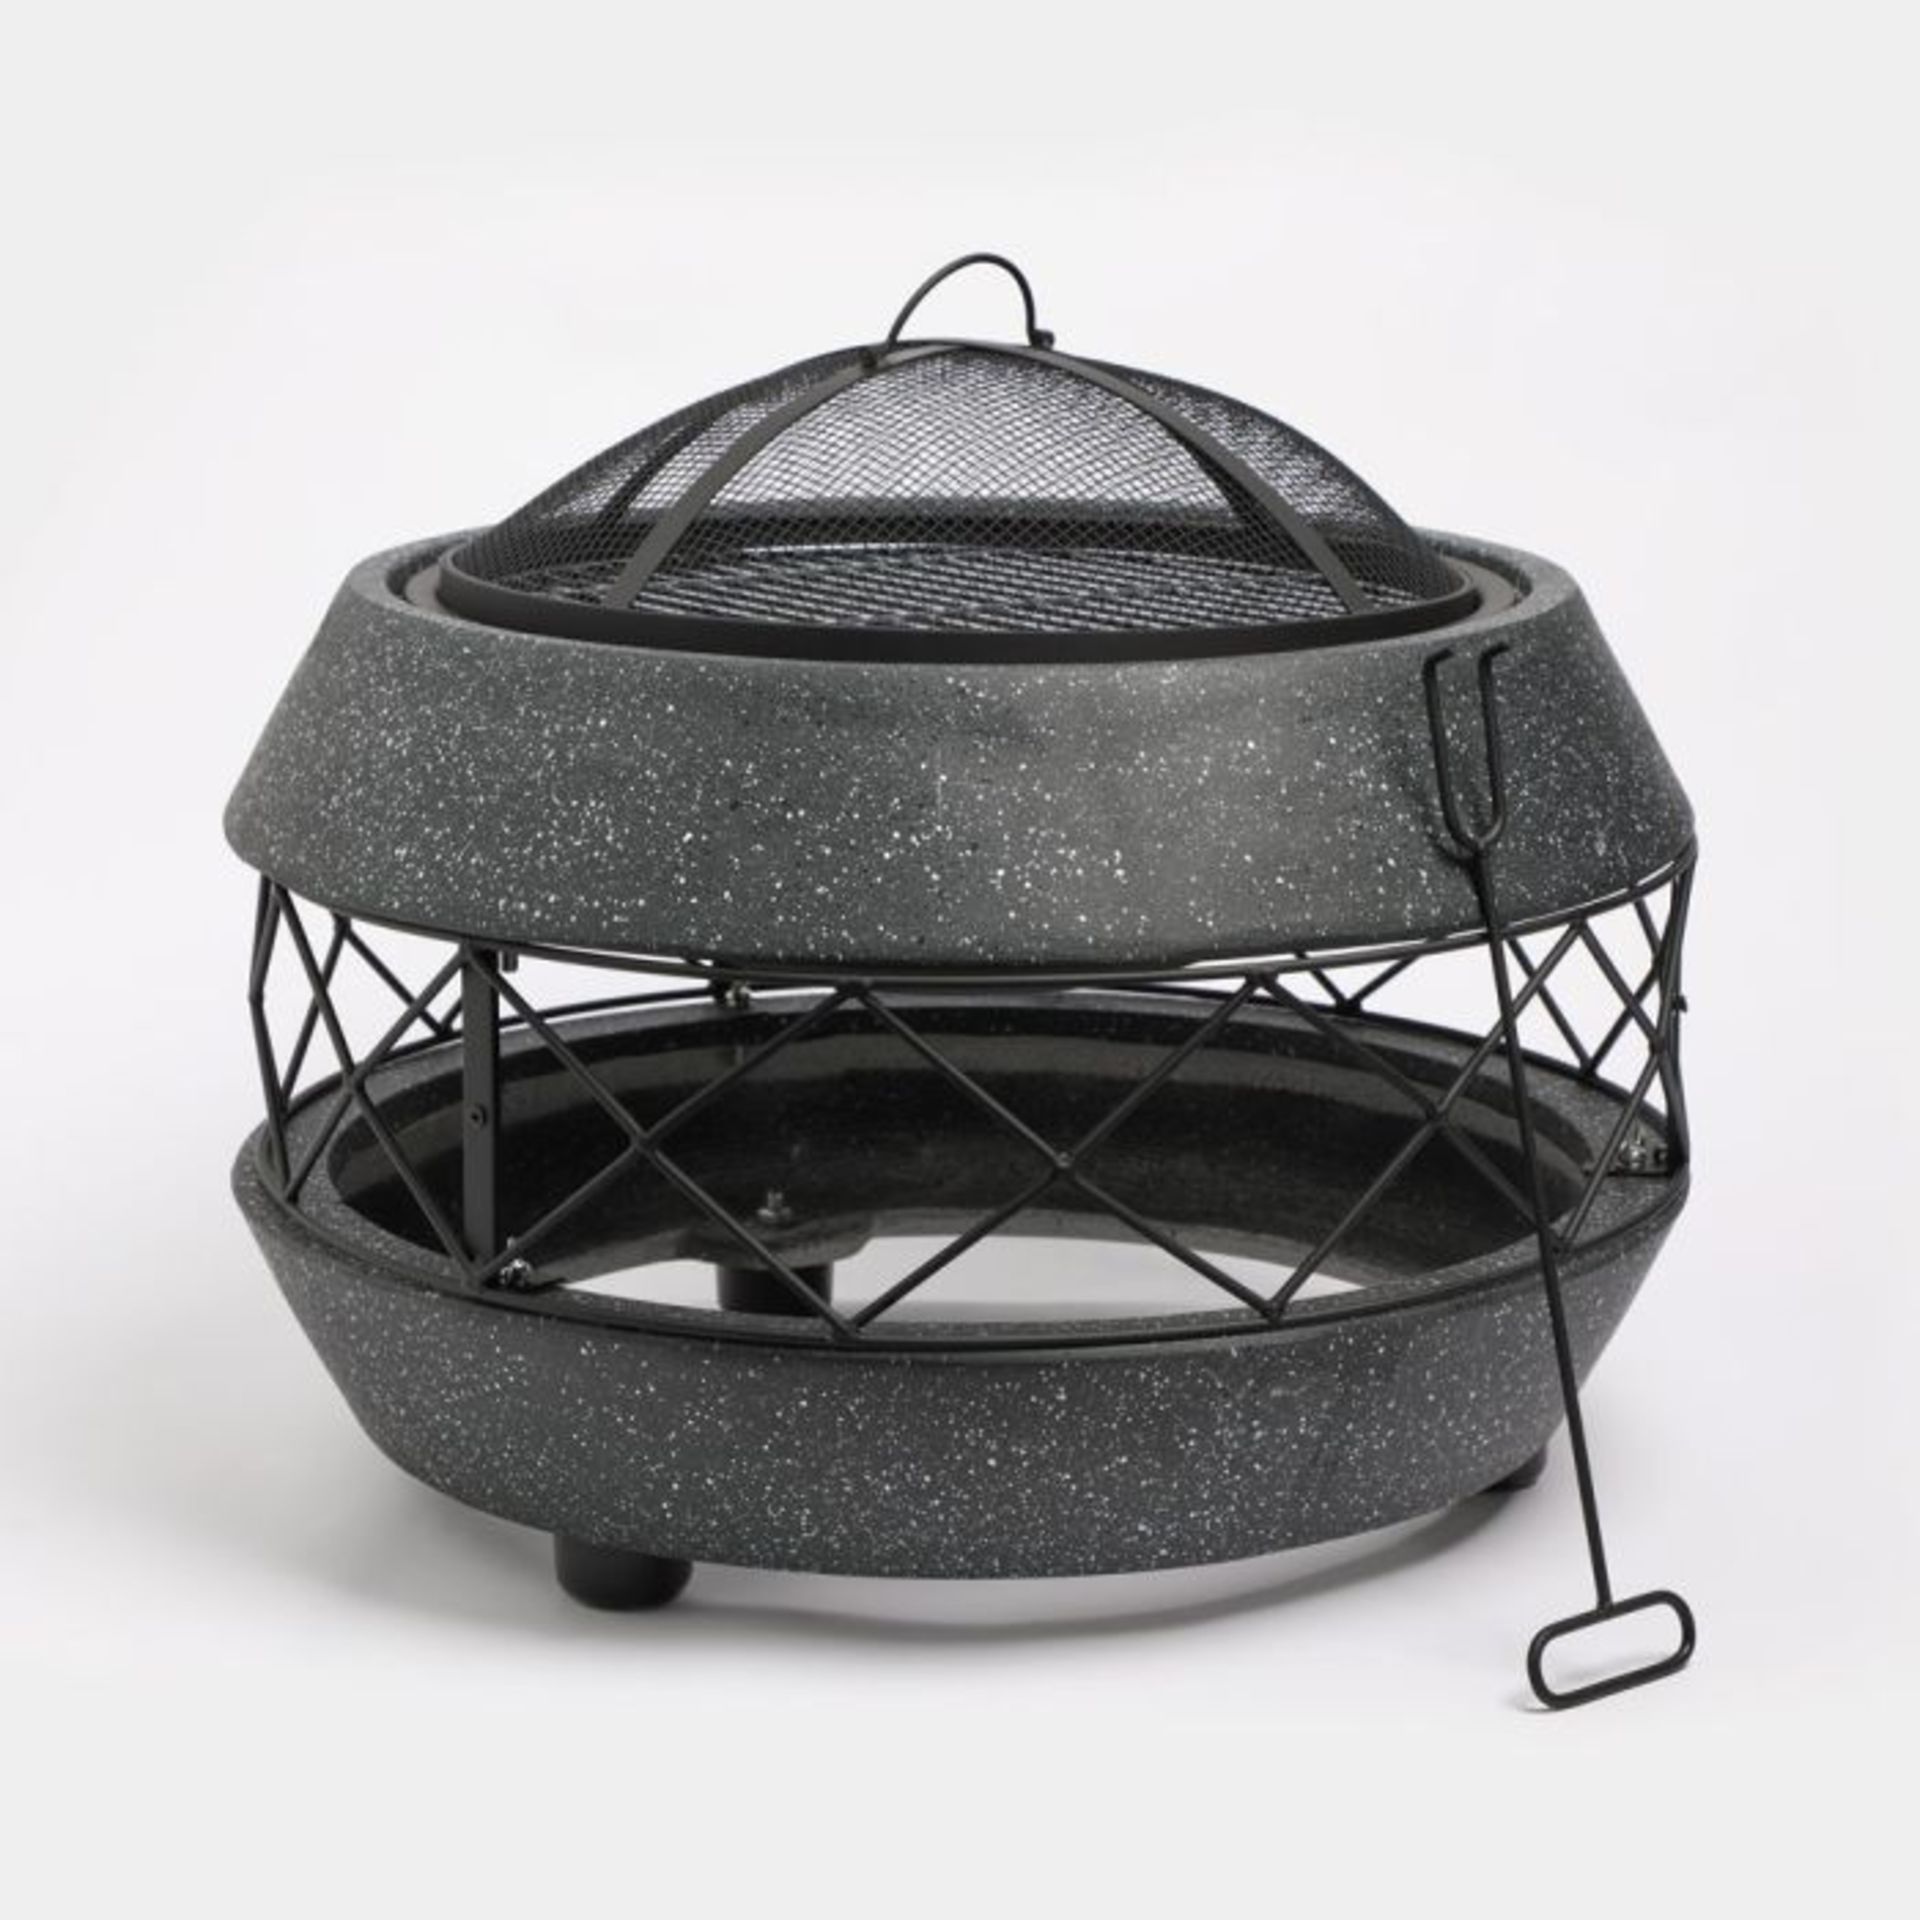 New & Boxed Luxury Black Faux Concrete MgO Fire Pit (250563). Whether you’re hosting a garden